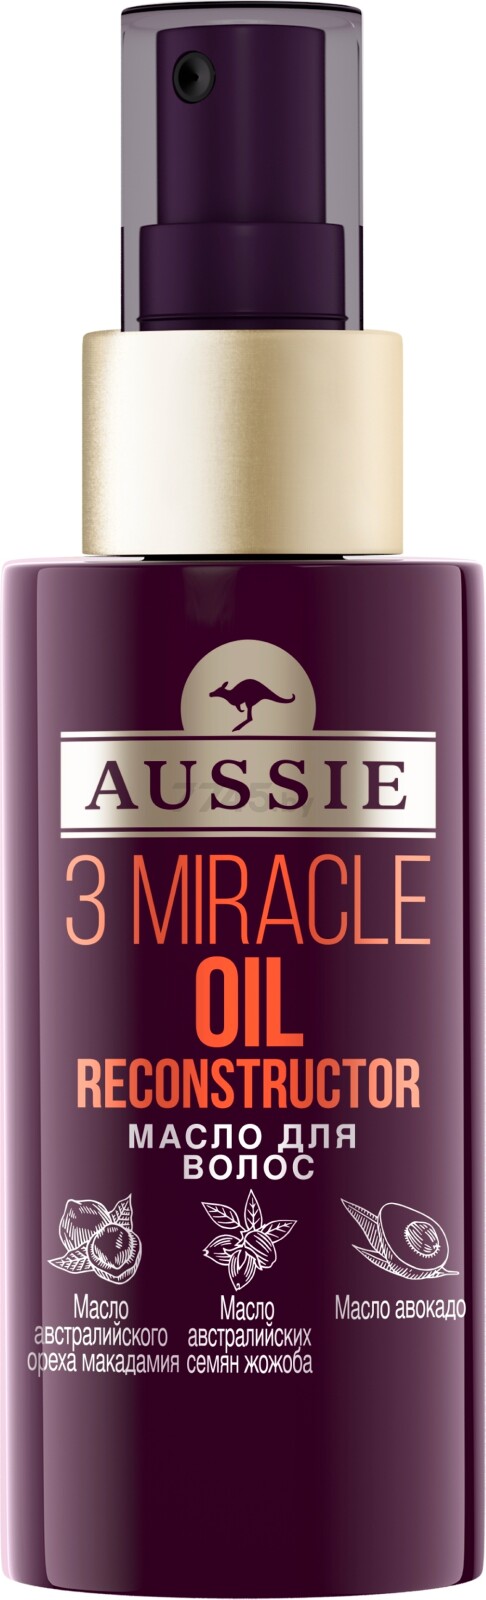 Масло AUSSIE 3 Miracle Oil Reconstructor 100 мл (8001841043906)